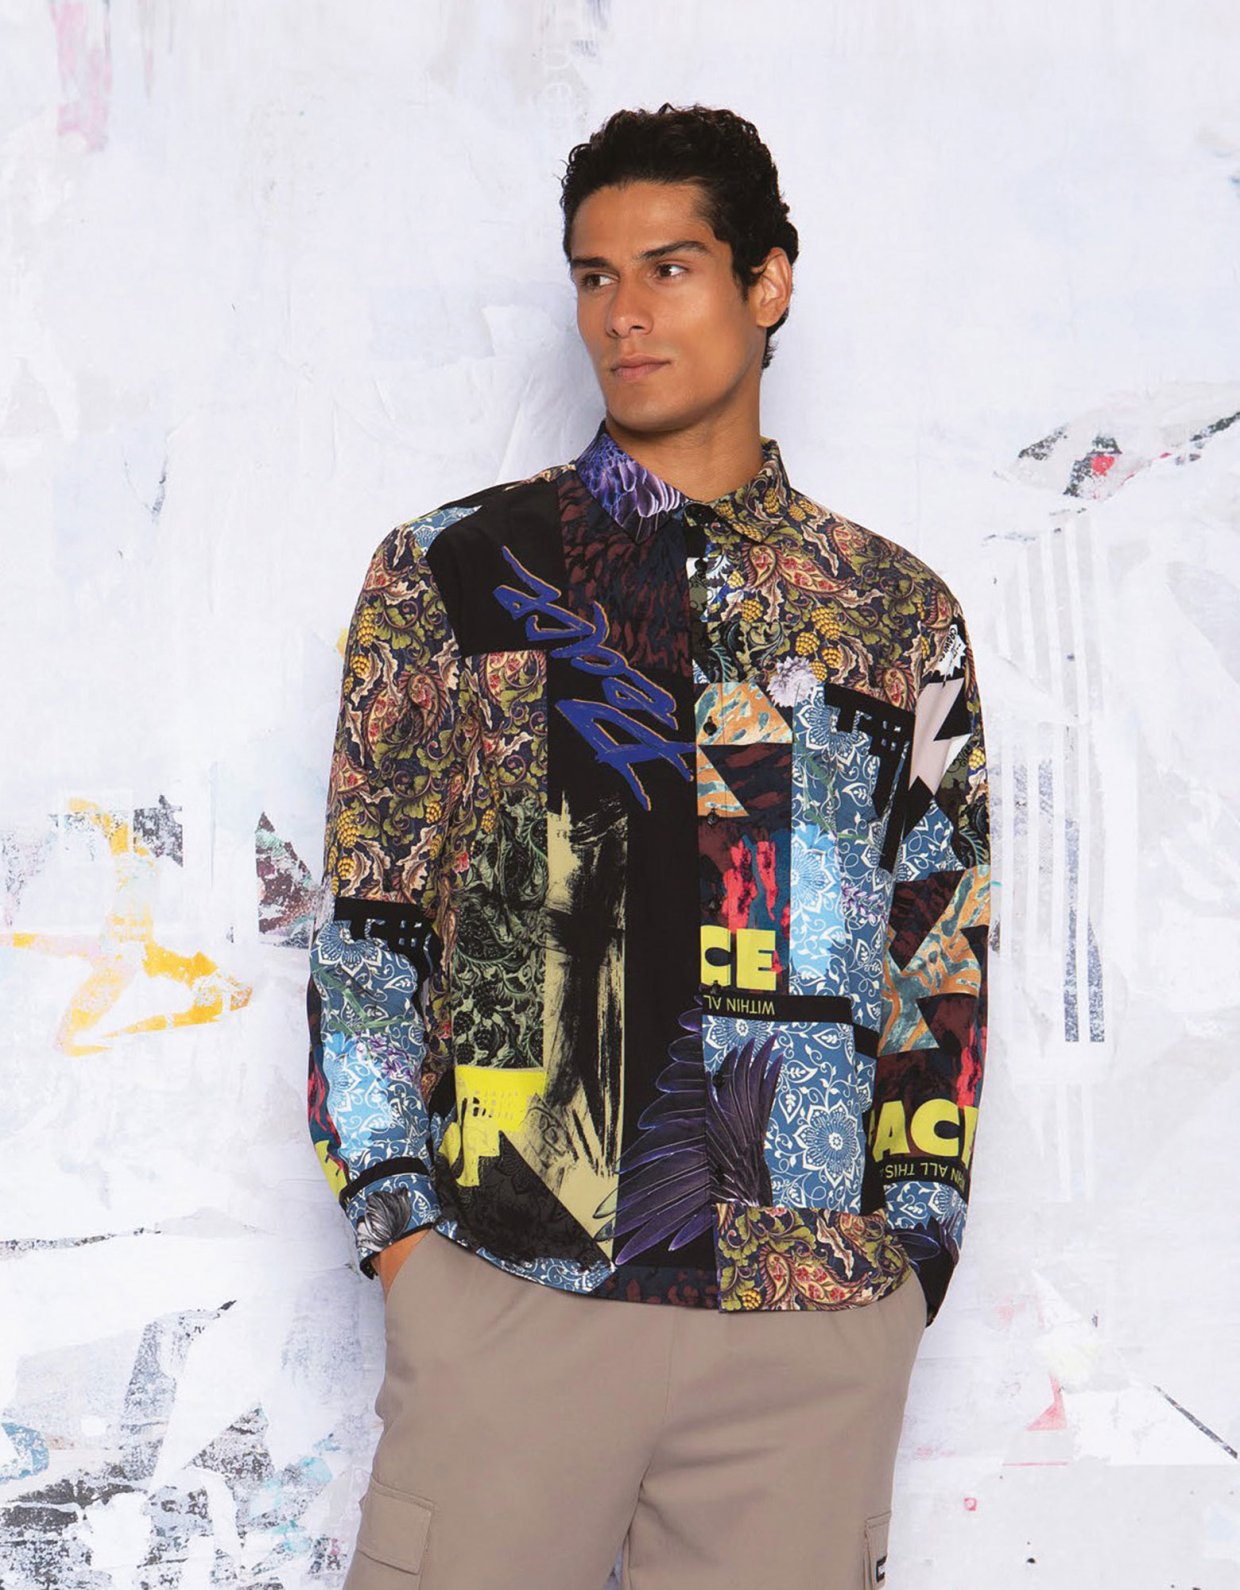 Peace & Chaos Collage shirt